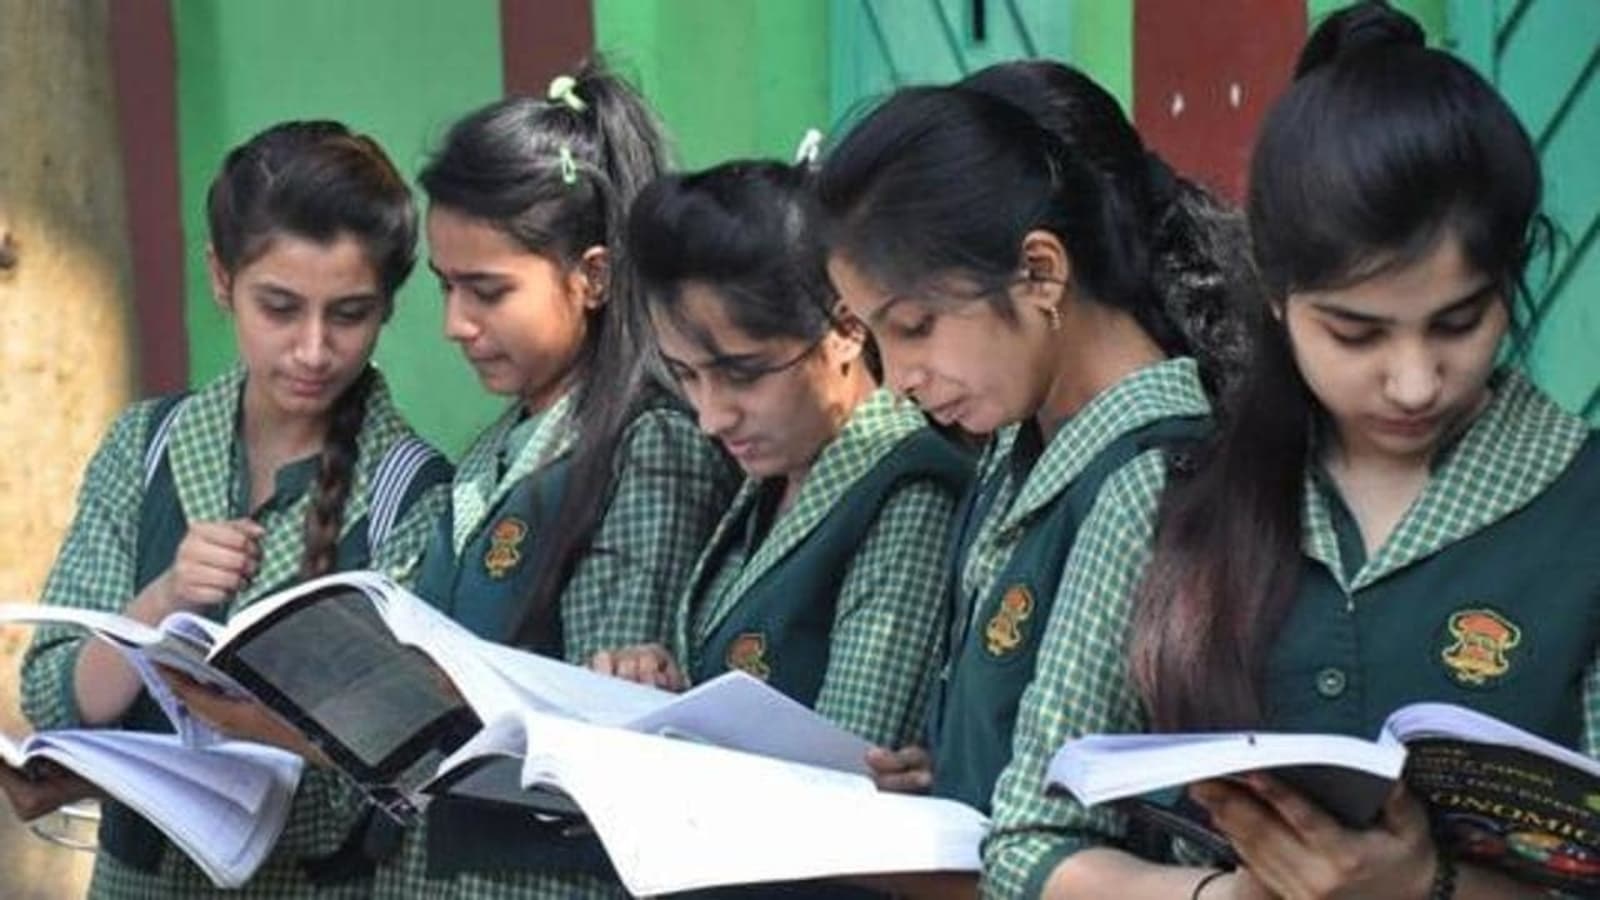 MBOSE Meghalaya HSSLC 12th Result 2021 declared at mbose.in, direct link here